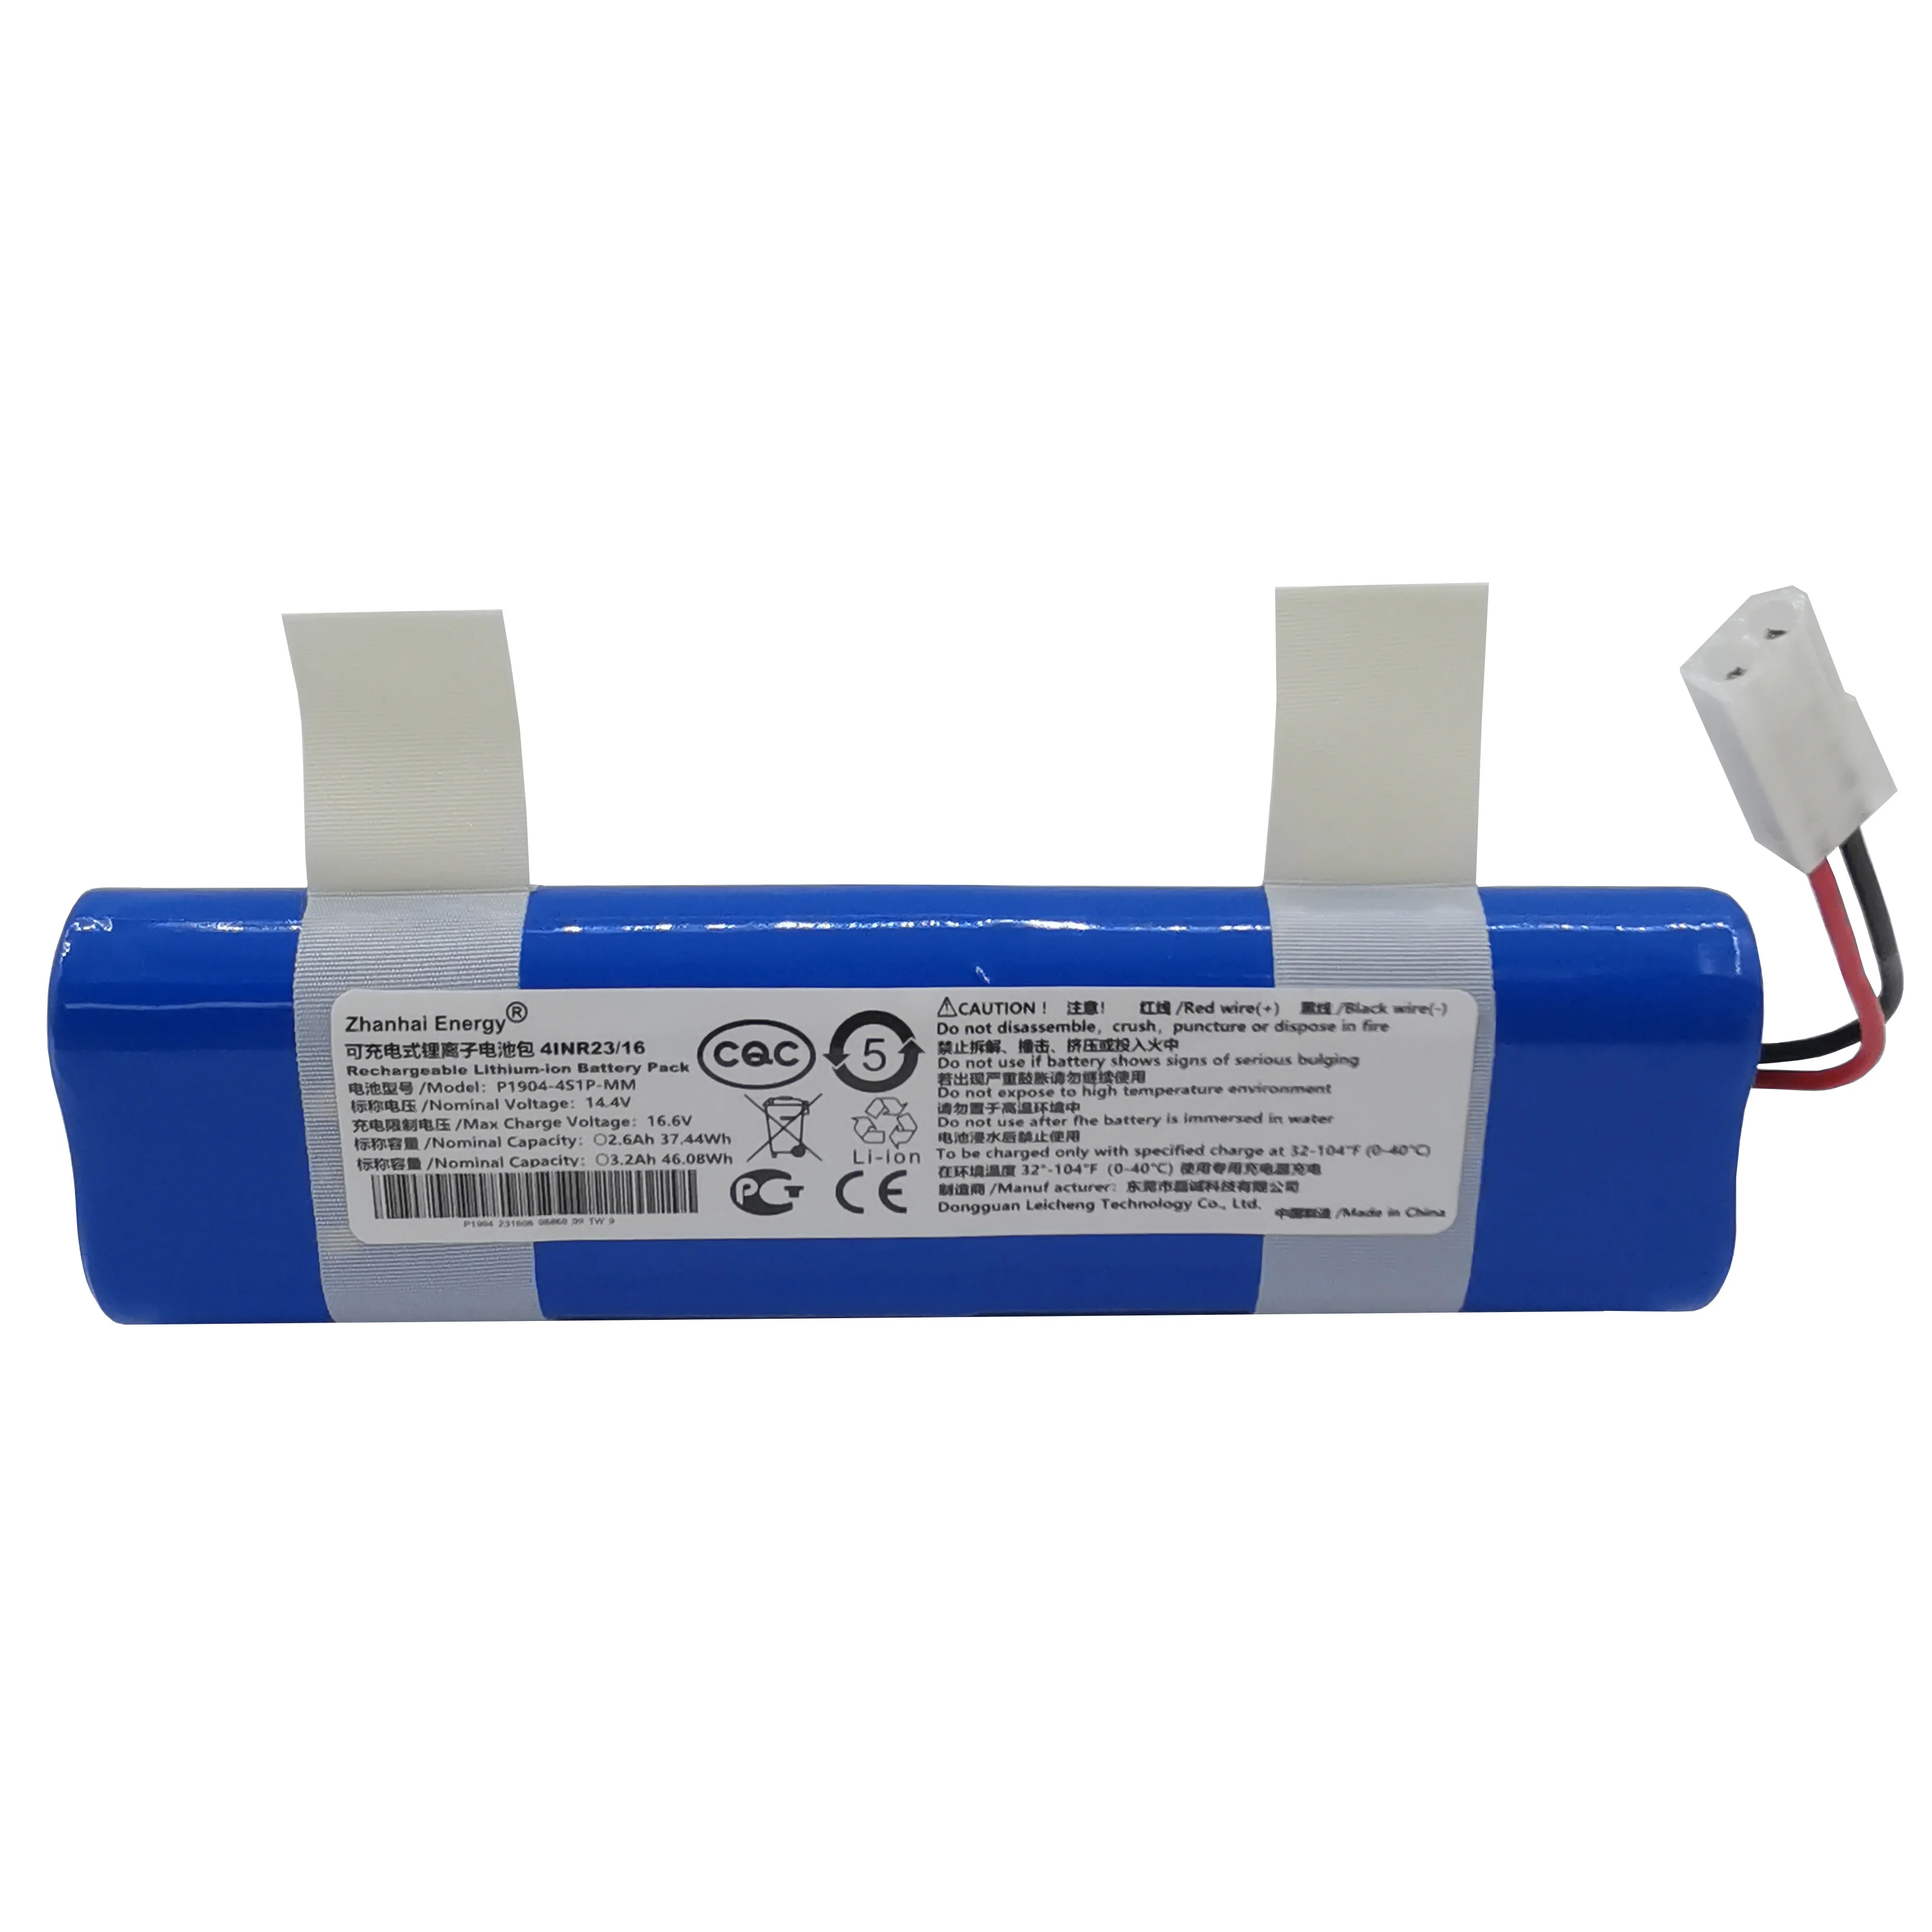 

14.4V 14.8V 3200mAh 2600mAh 18650 Li-Ion Cylindrical Rechargeable Battery Pack For 360 Sweeping Robot S6 New Customizable